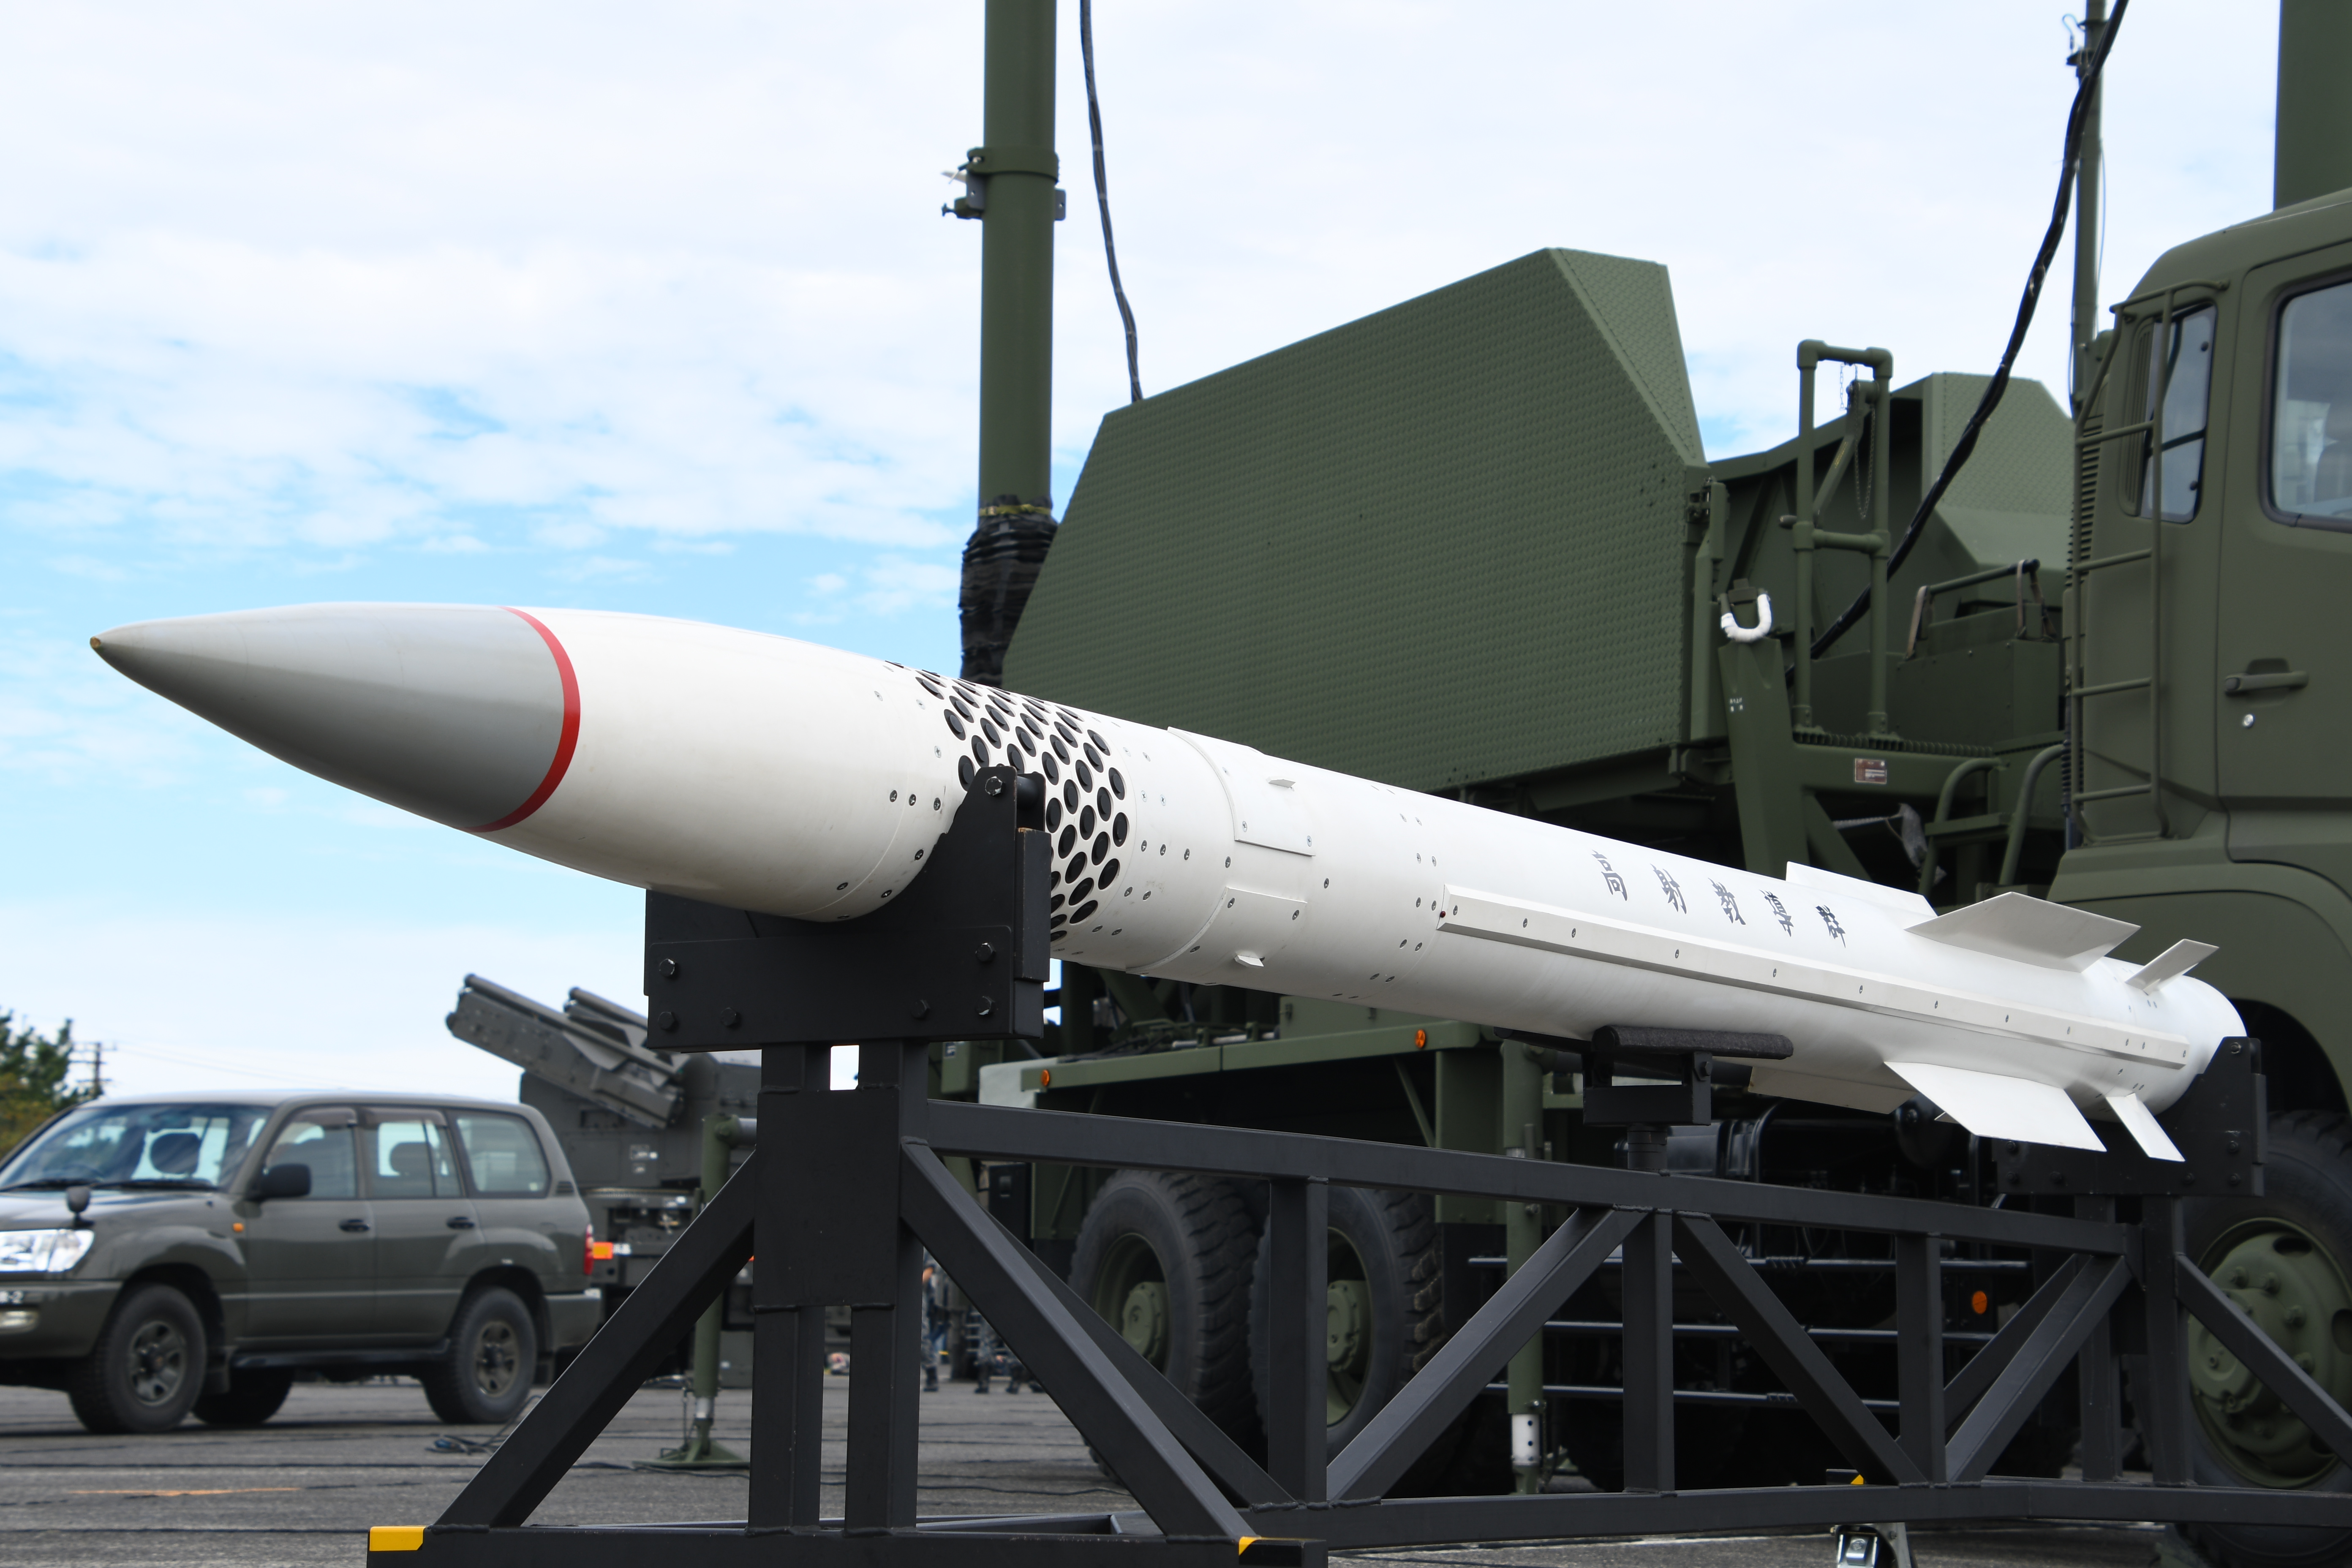 JASDF_MIM-104_Patriot_PAC-3_Missile%28dummy_model%29_left_front_low-angle_view_at_Hamamatsu_Air_Base_October_20%2C_2019.jpg